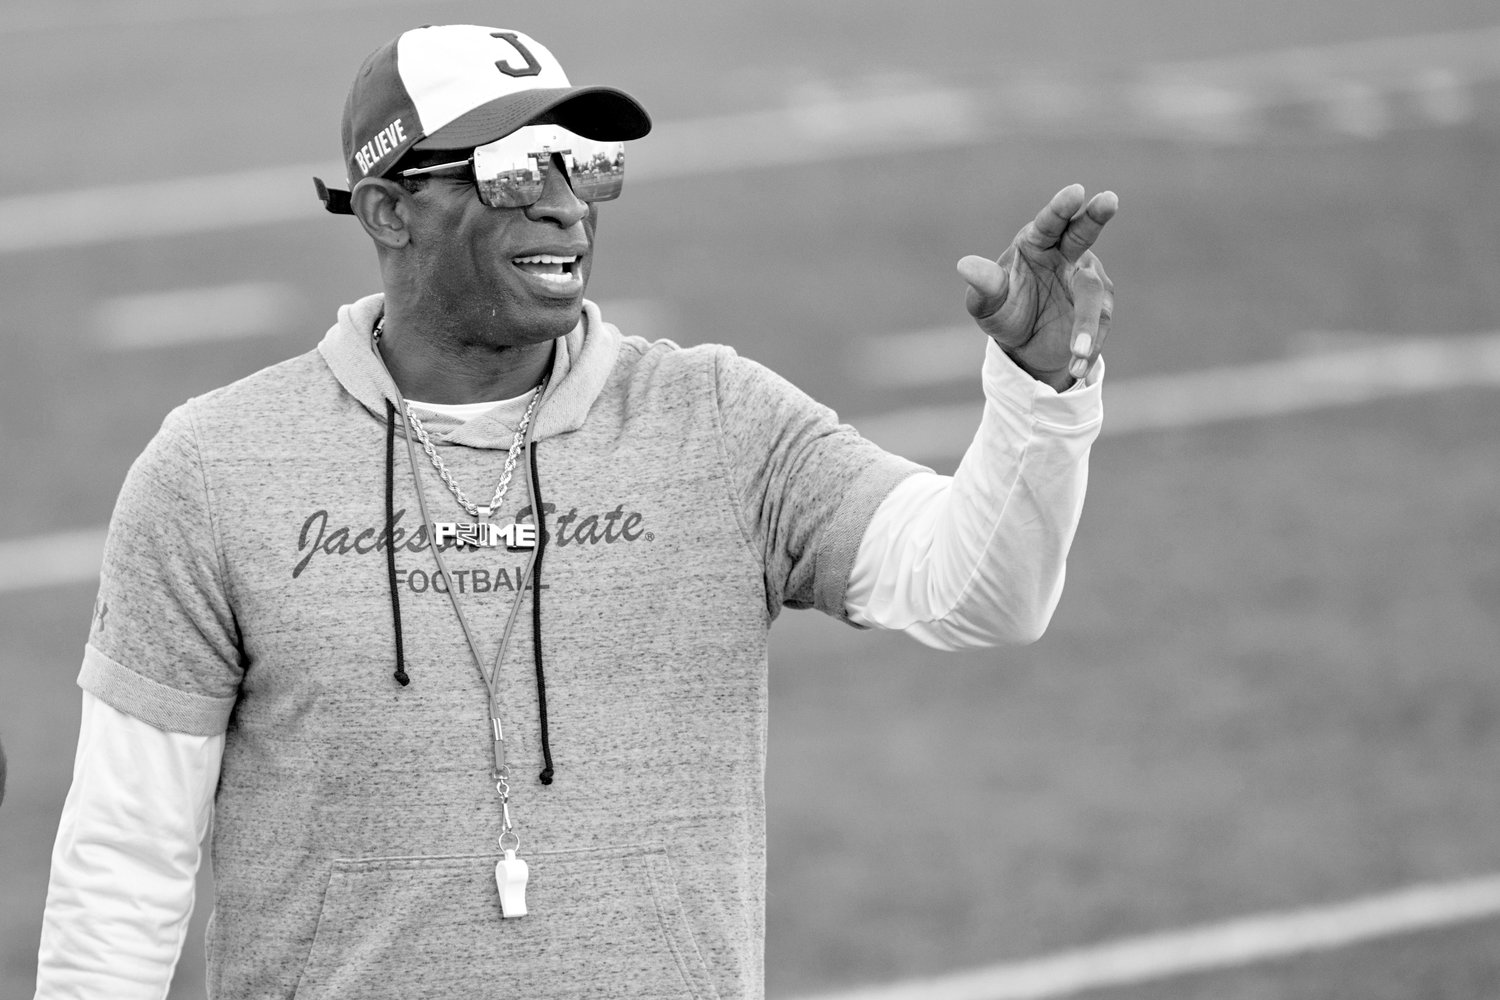 COACH PRIME — Jackson State head coach Deion Sanders points during an NCAA football game against Louisiana Monroe on Saturday, Sept. 18, in Monroe, La. Sanders has been all over national TV, putting Jackson State in the spotlight every time his insurance commercials air. Hiring Eddie George has had a similar effect at Tennessee State.